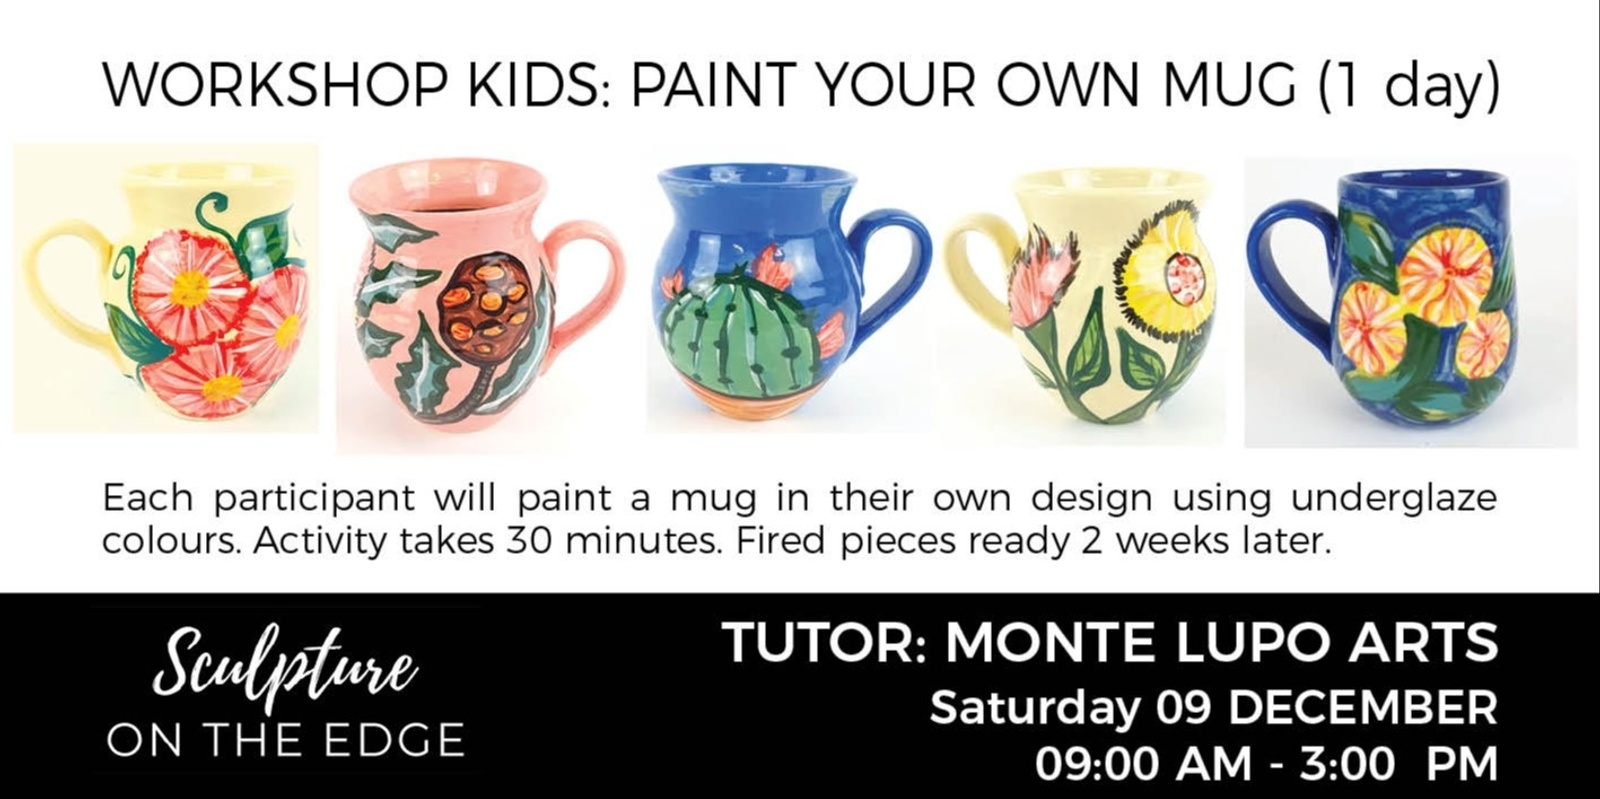 Banner image for WORKSHOP KIDS: Paint your own mug with Monte Lupo Arts Saturday 09 December